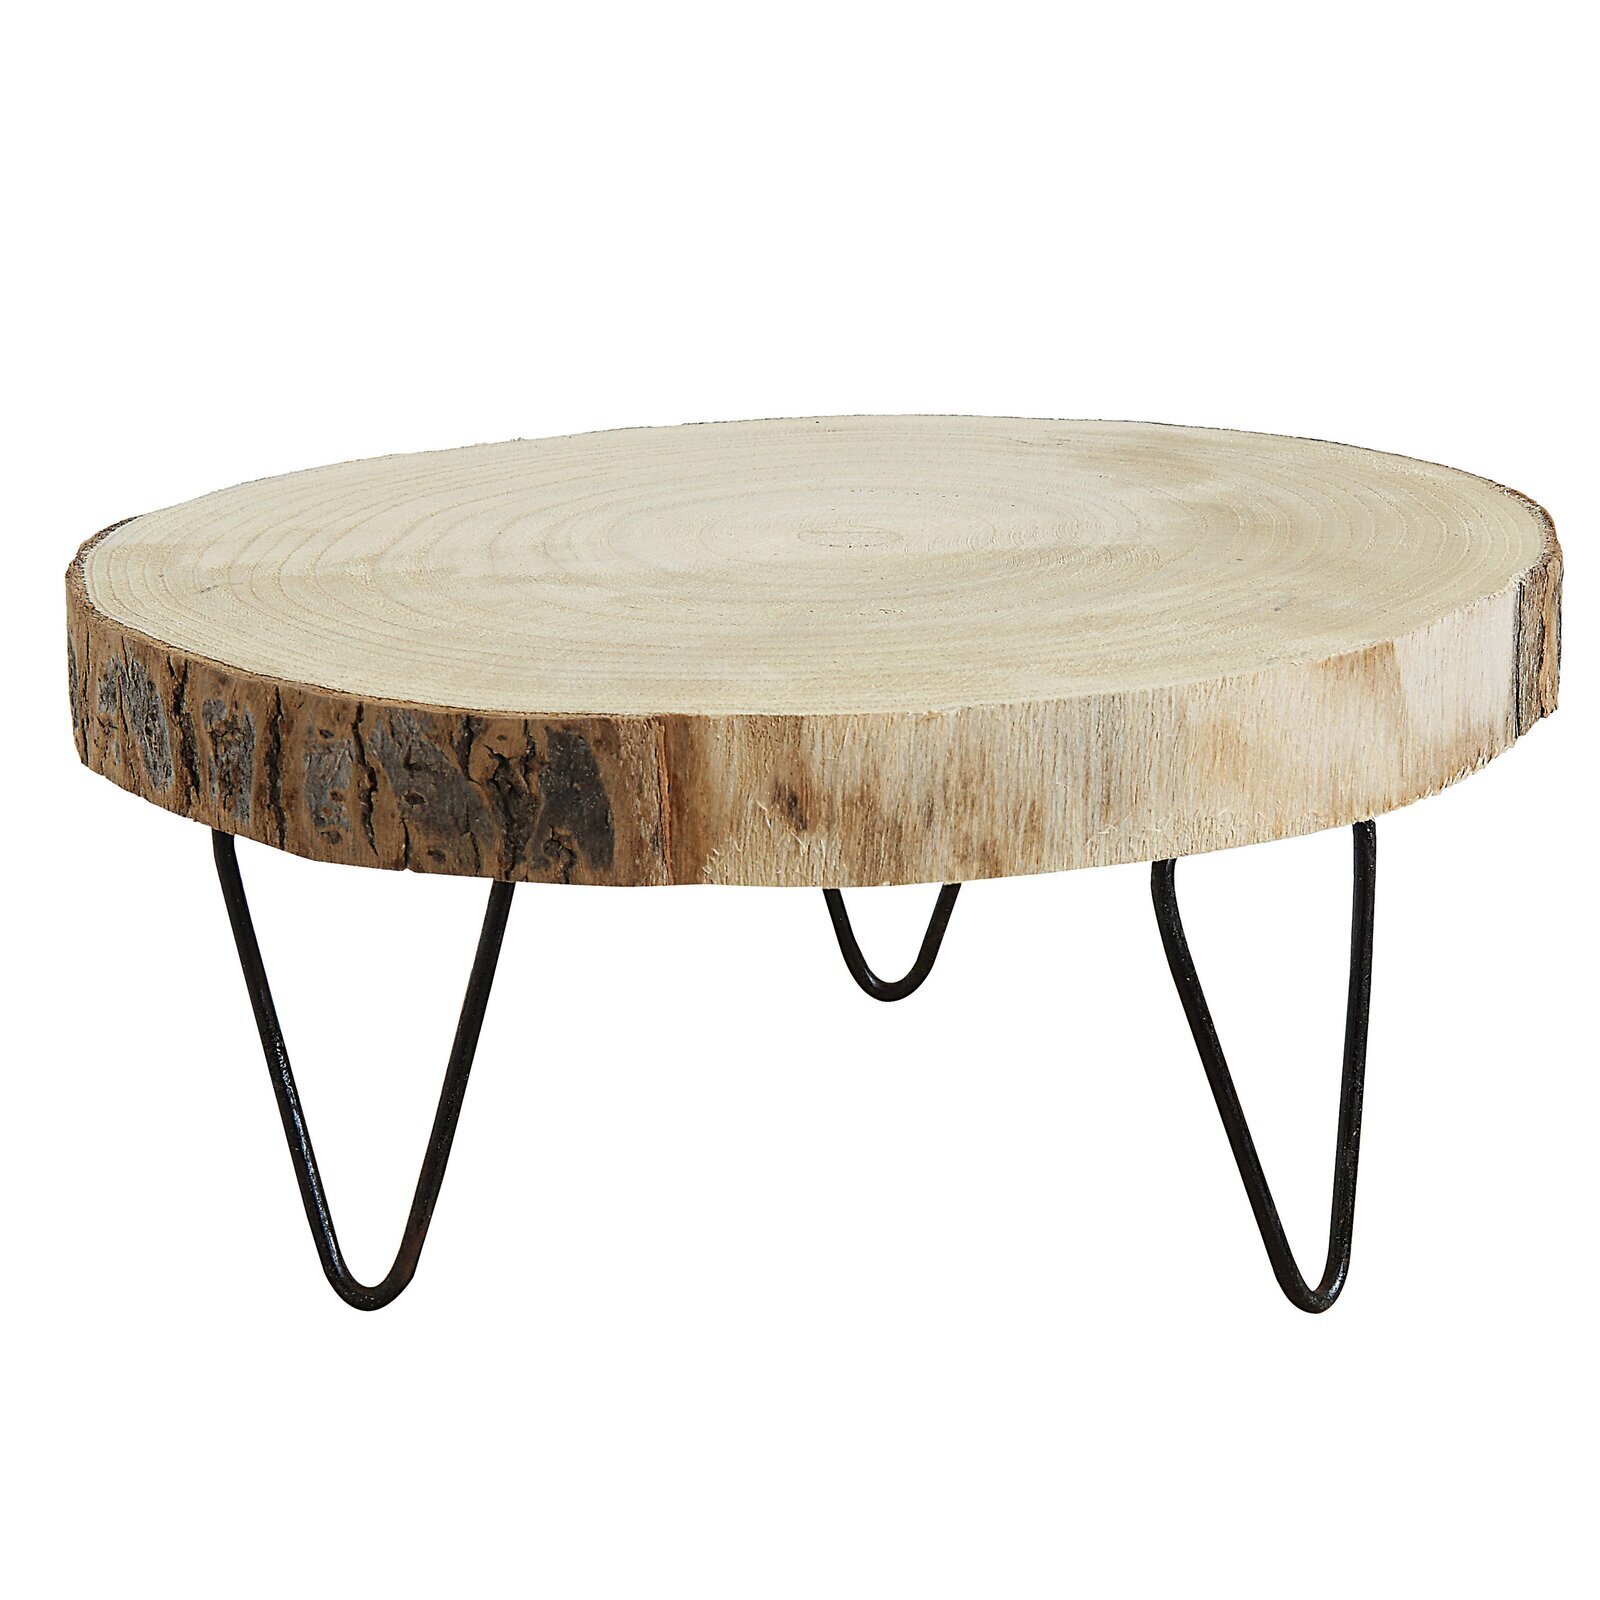 Low Level Natural Wood Pedestal With Rustic Feel 